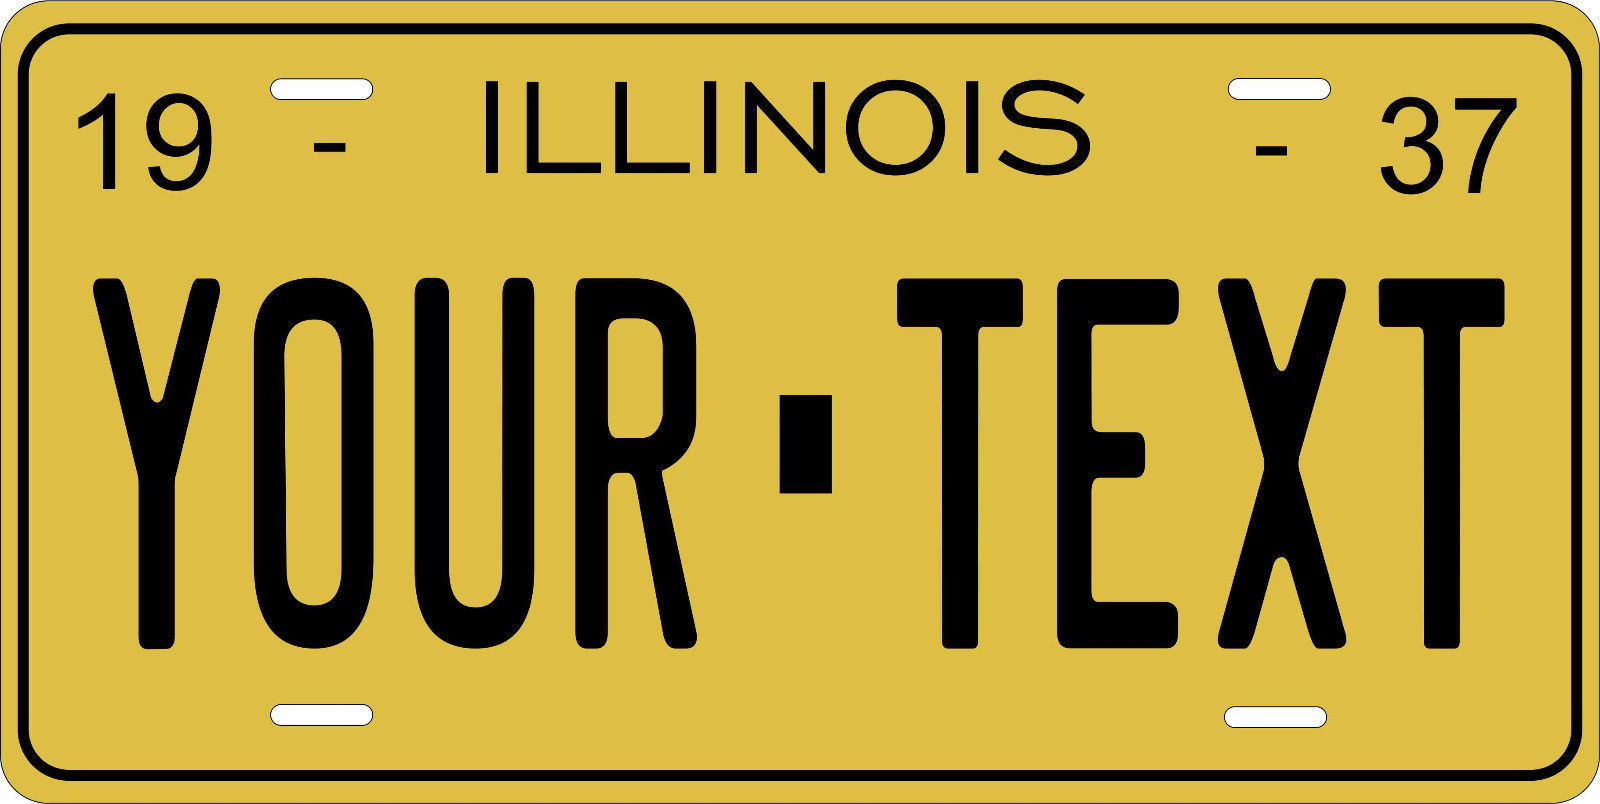 Illinois 1937 License Plate Personalized Custom Car Auto Bike Motorcycle Moped - $10.99 - $18.22